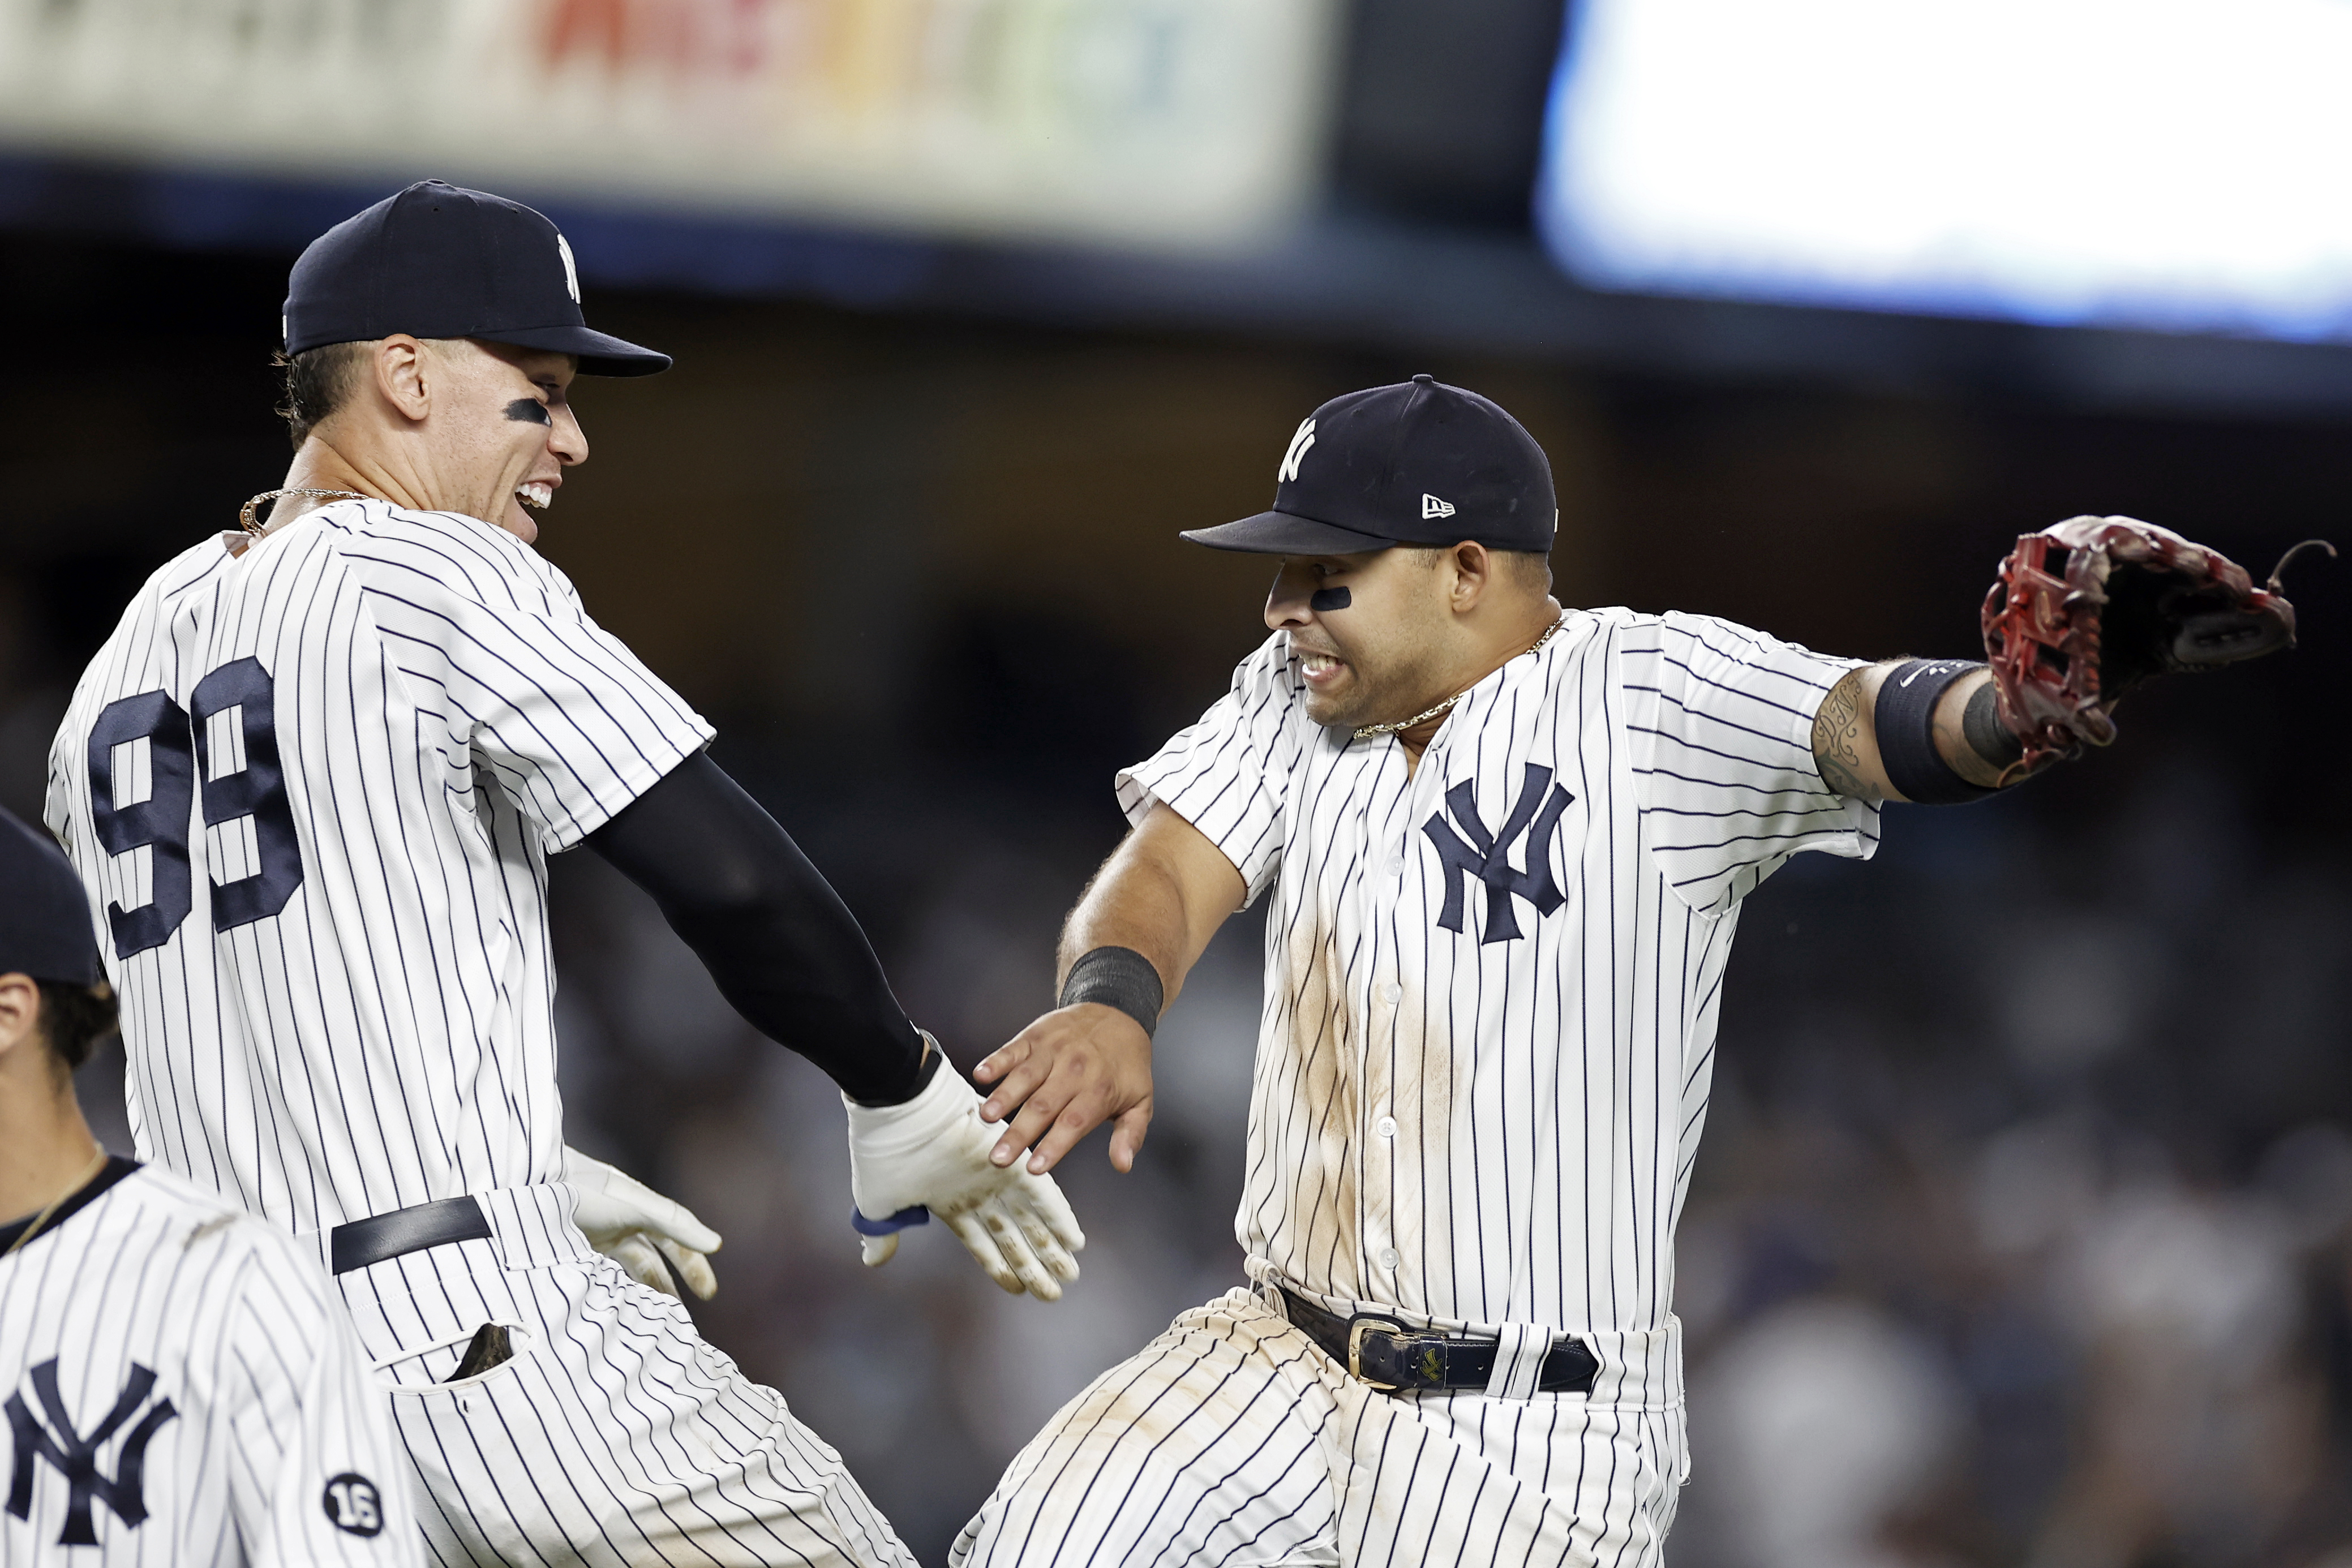 Anthony Rizzo Provides New York Yankees With Comfort And Stability